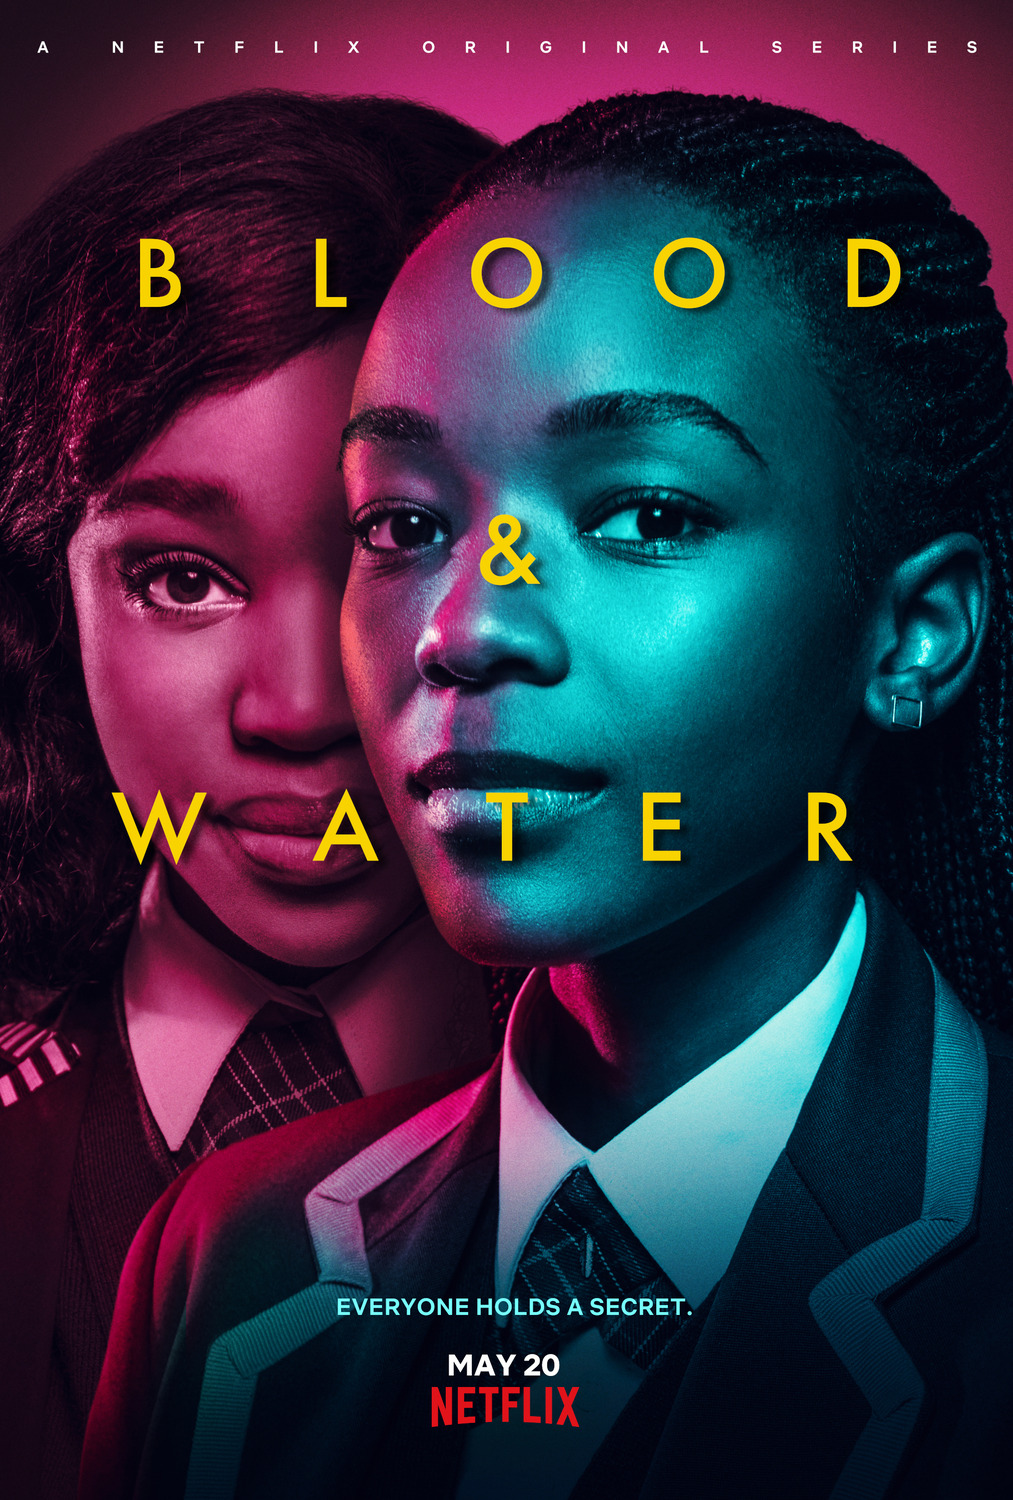 blood and water netflix poster